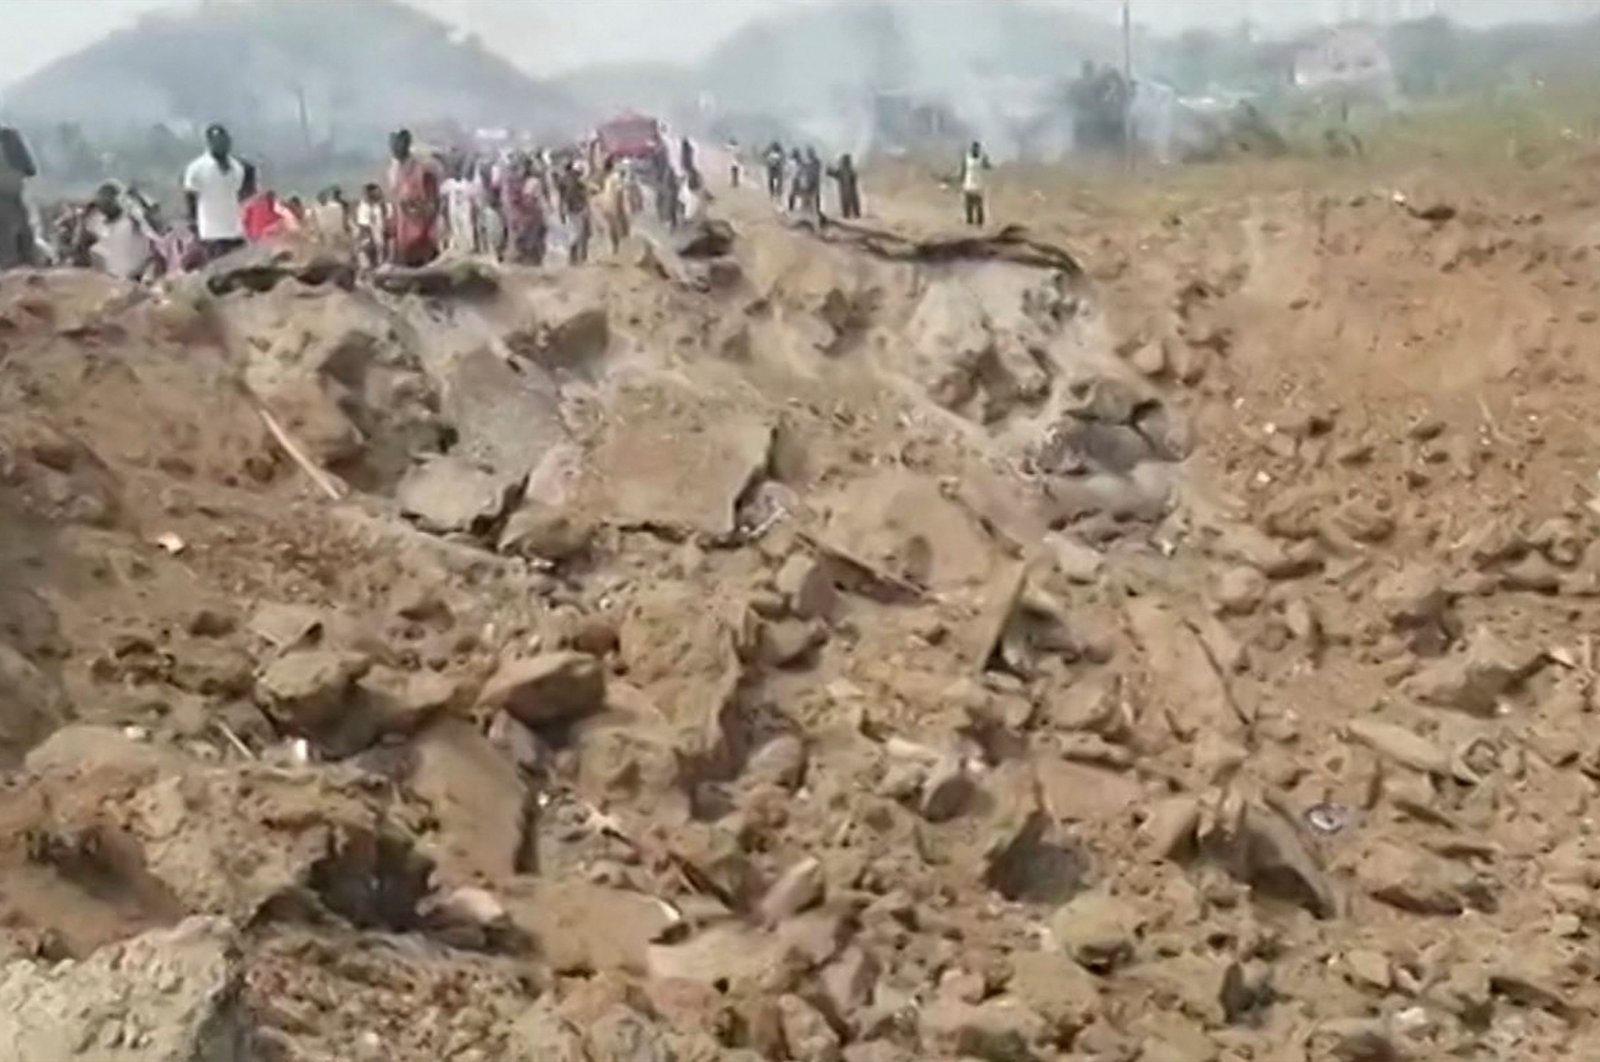 This handout video grab obtained by AFPTV from ConnectFM/TV3 on Jan. 20, 2022, shows people gathering around a large crater after a blast caused by the crash between a truck carrying explosives and a motorcycle in Apiate, near the city of Bogoso, Ghana. (Photo by Eric Yaw Adjei / ConnectFM/TV3 / AFP)